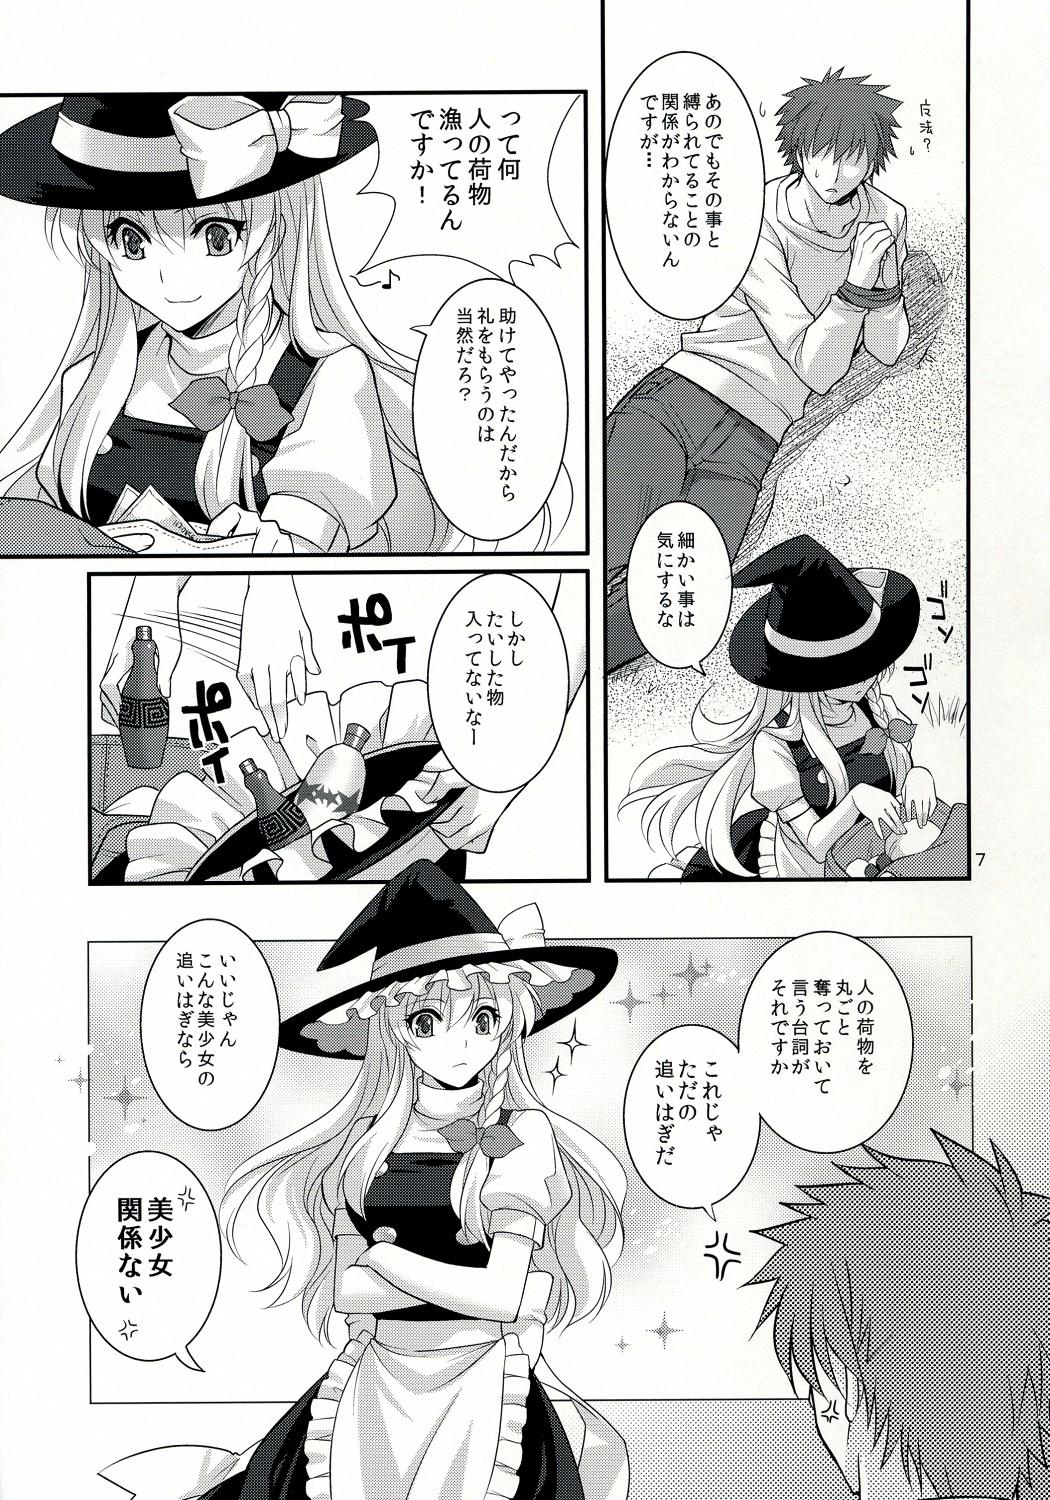 Crossdresser Ze!! - Touhou project Natural - Page 7